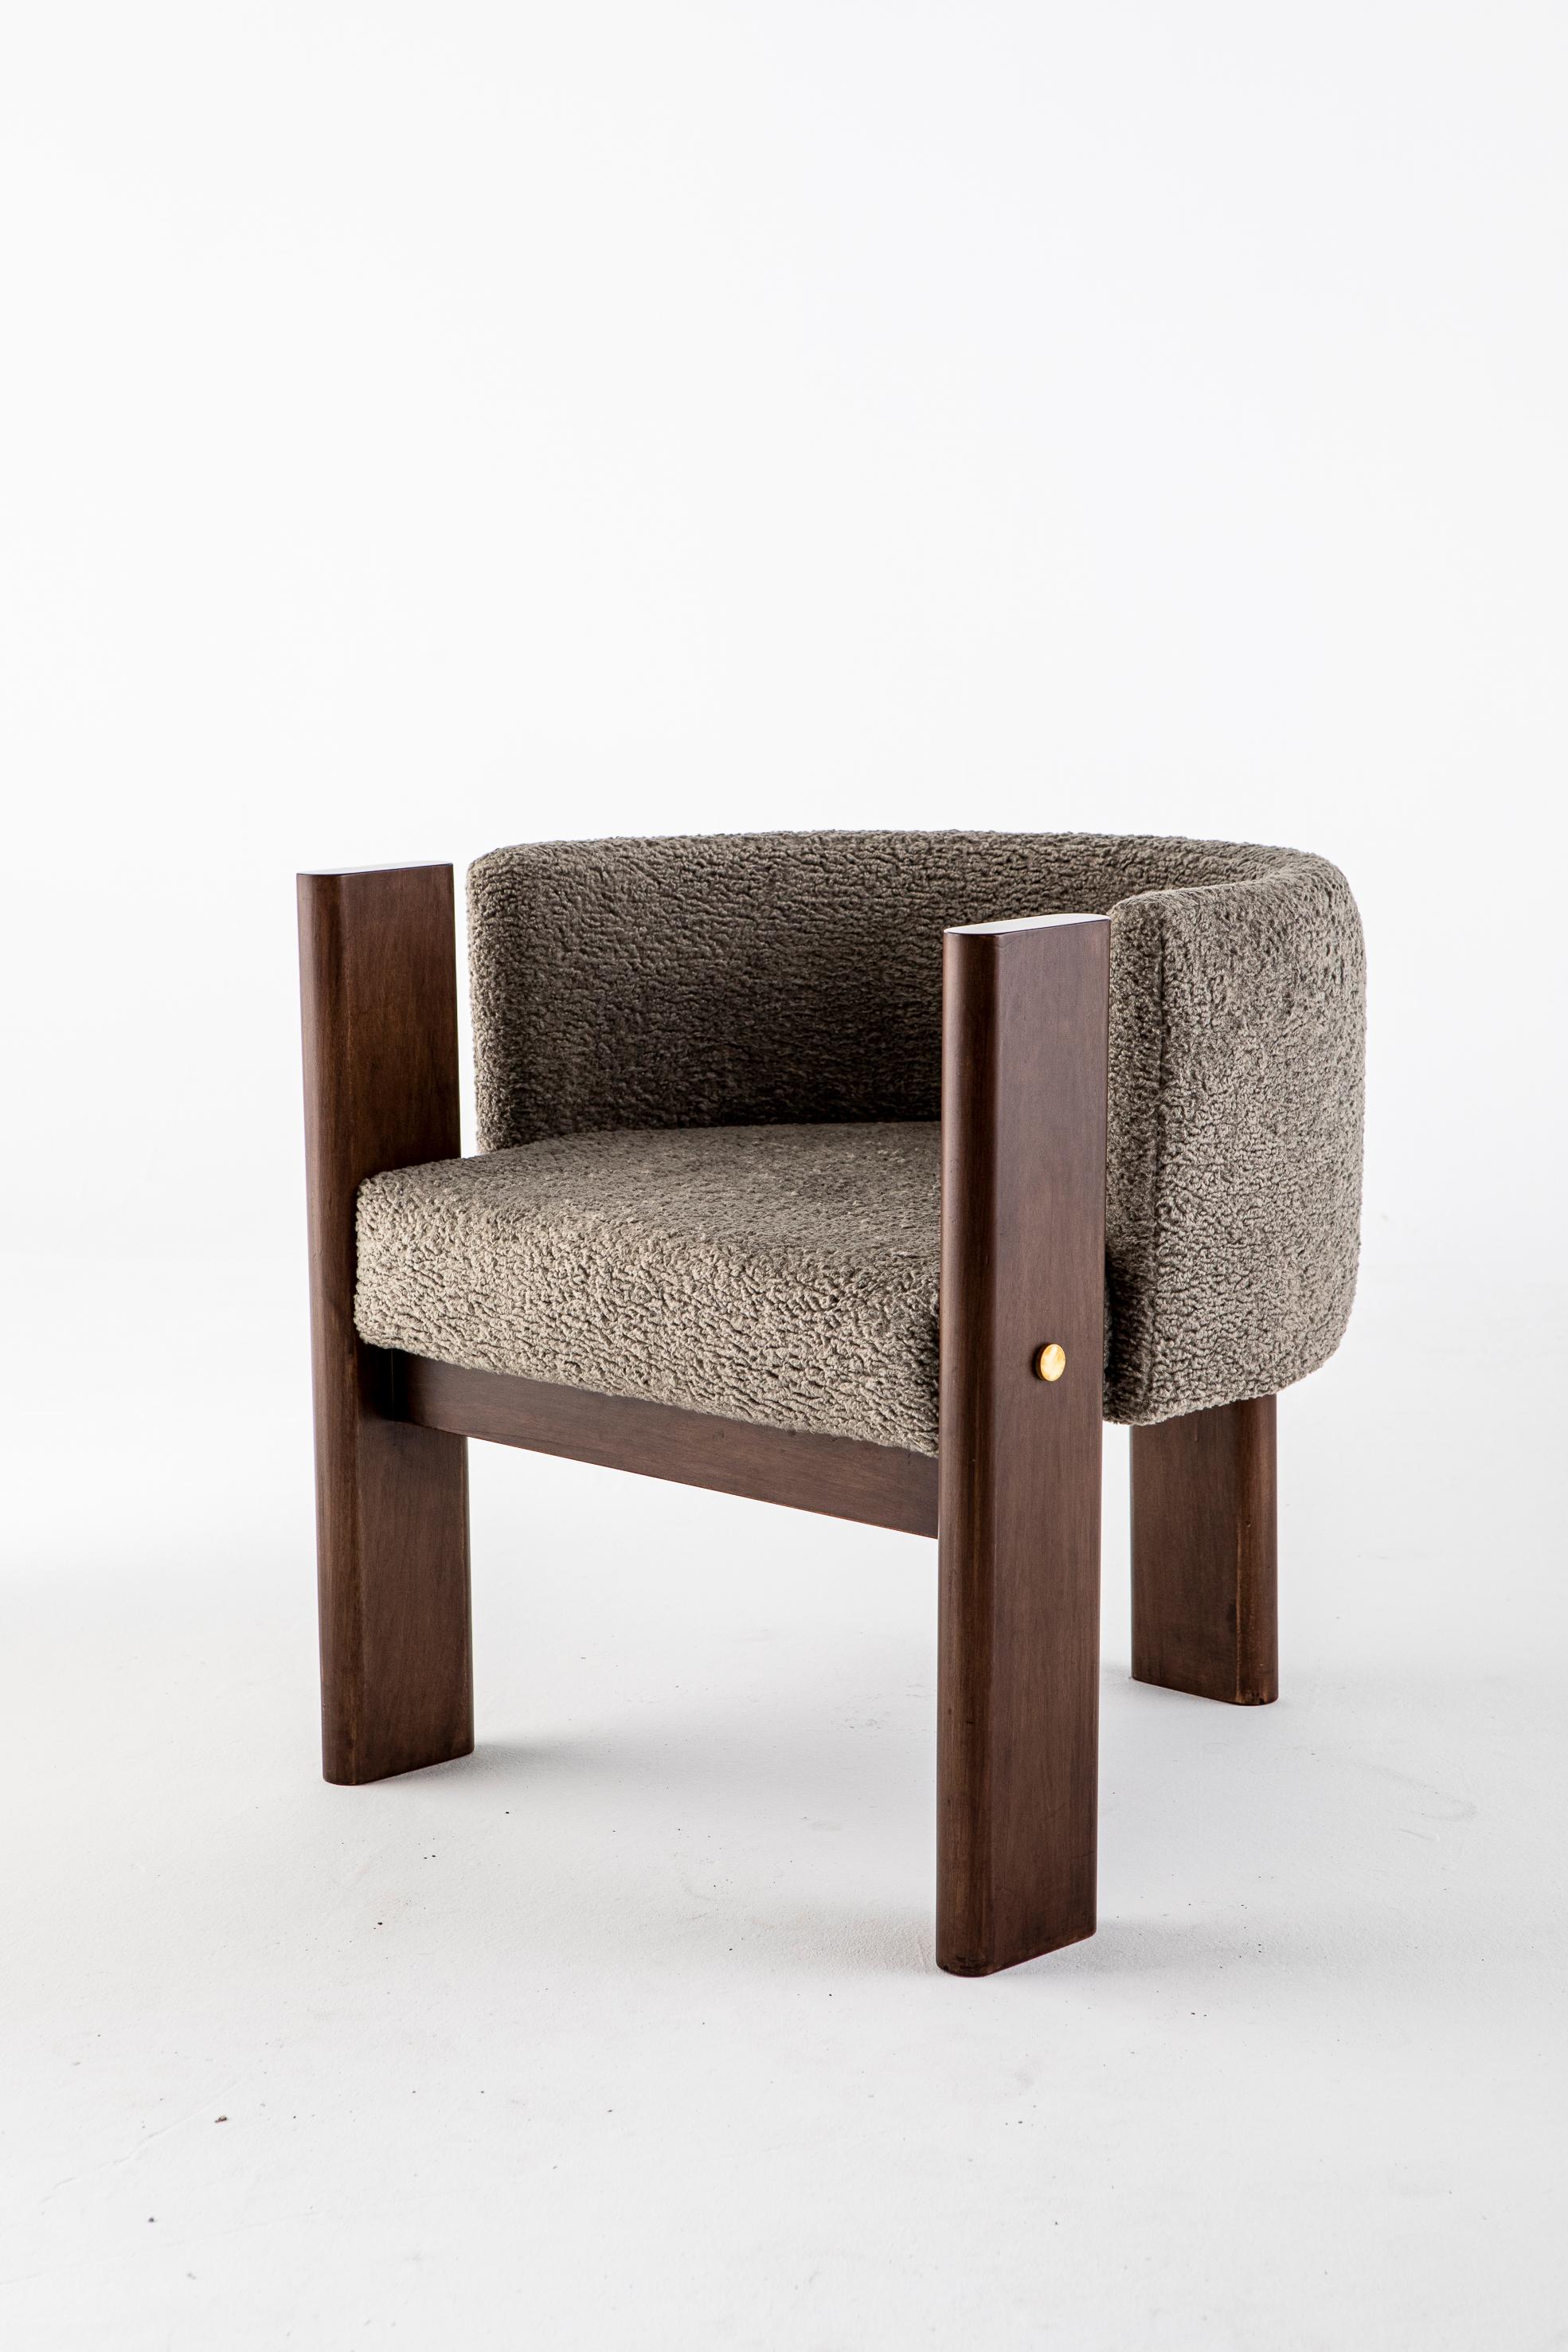 Malta Boucle dining chair by Egg Designs
Dimensions: 70 L X 68 D X 70 H
Materials: Walnut Timber, Brass, Grey Bouche Upholstery

Founded by South Africans and life partners, Greg and Roche Dry - Egg is a unique perspective in contemporary